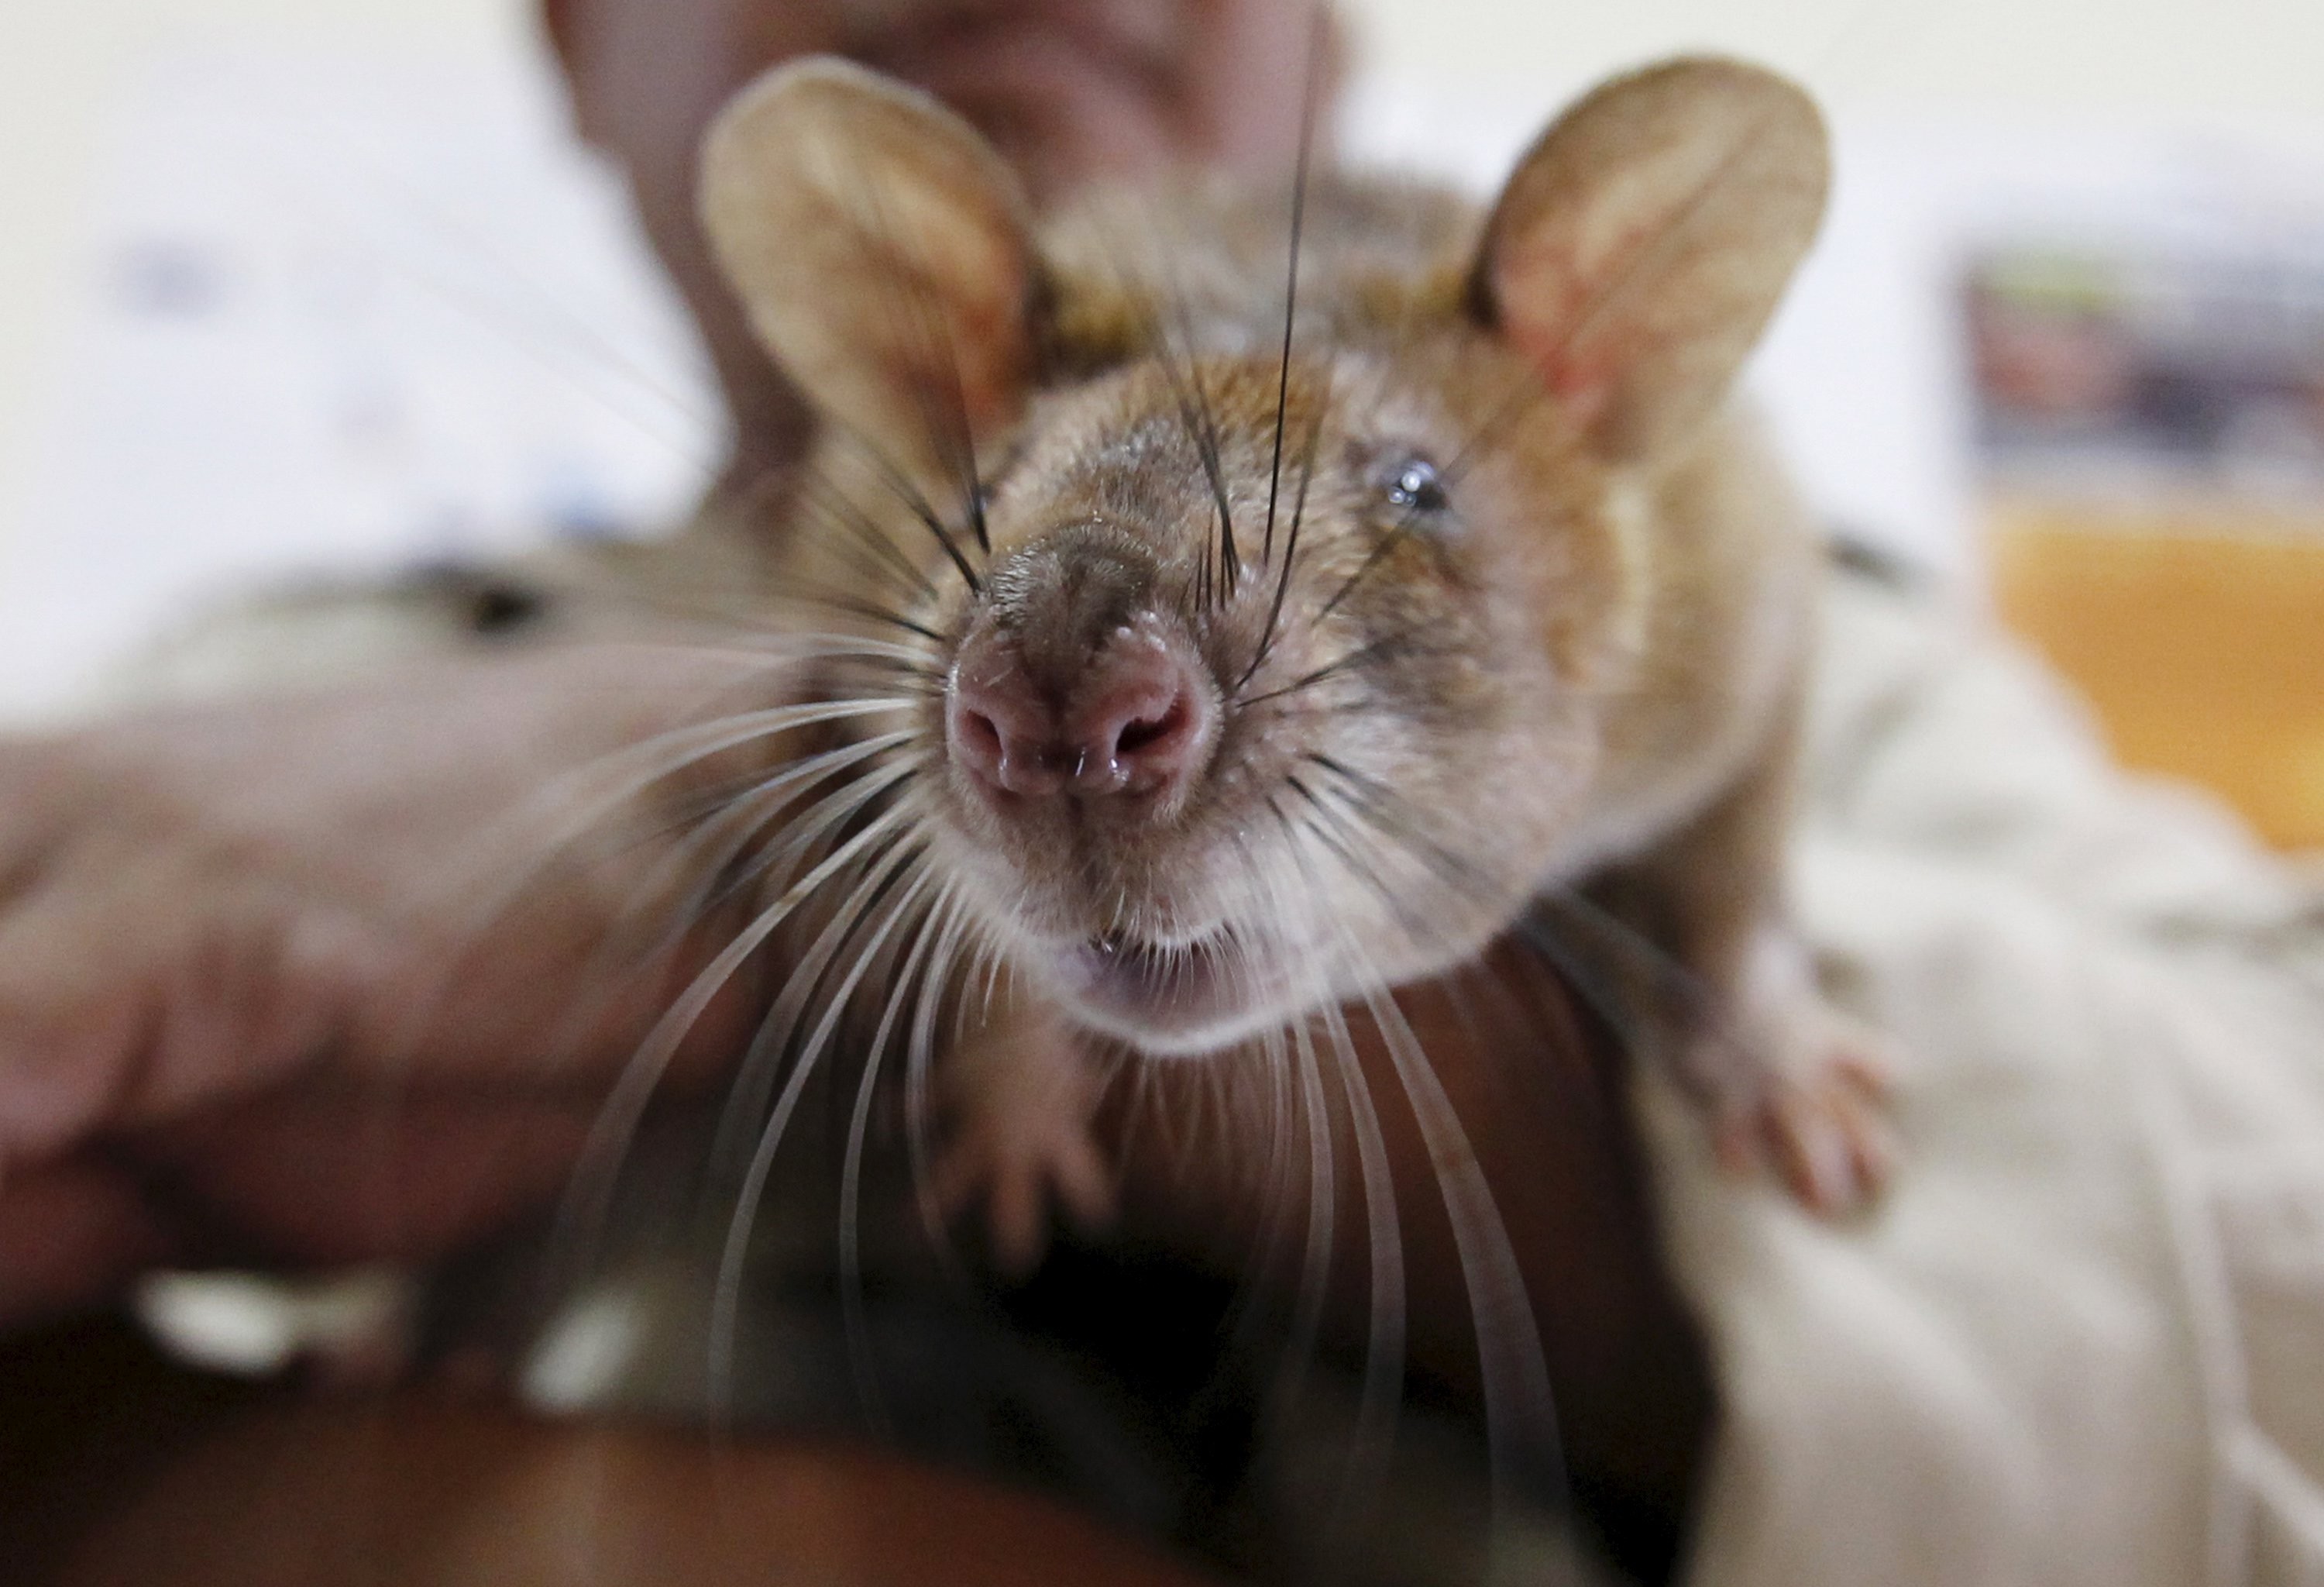 More than a century ago, a plague caused by fleas from rats devastated Hong Kong and went on to become a global pandemic. Photo: Reuters/ Samrang Pring